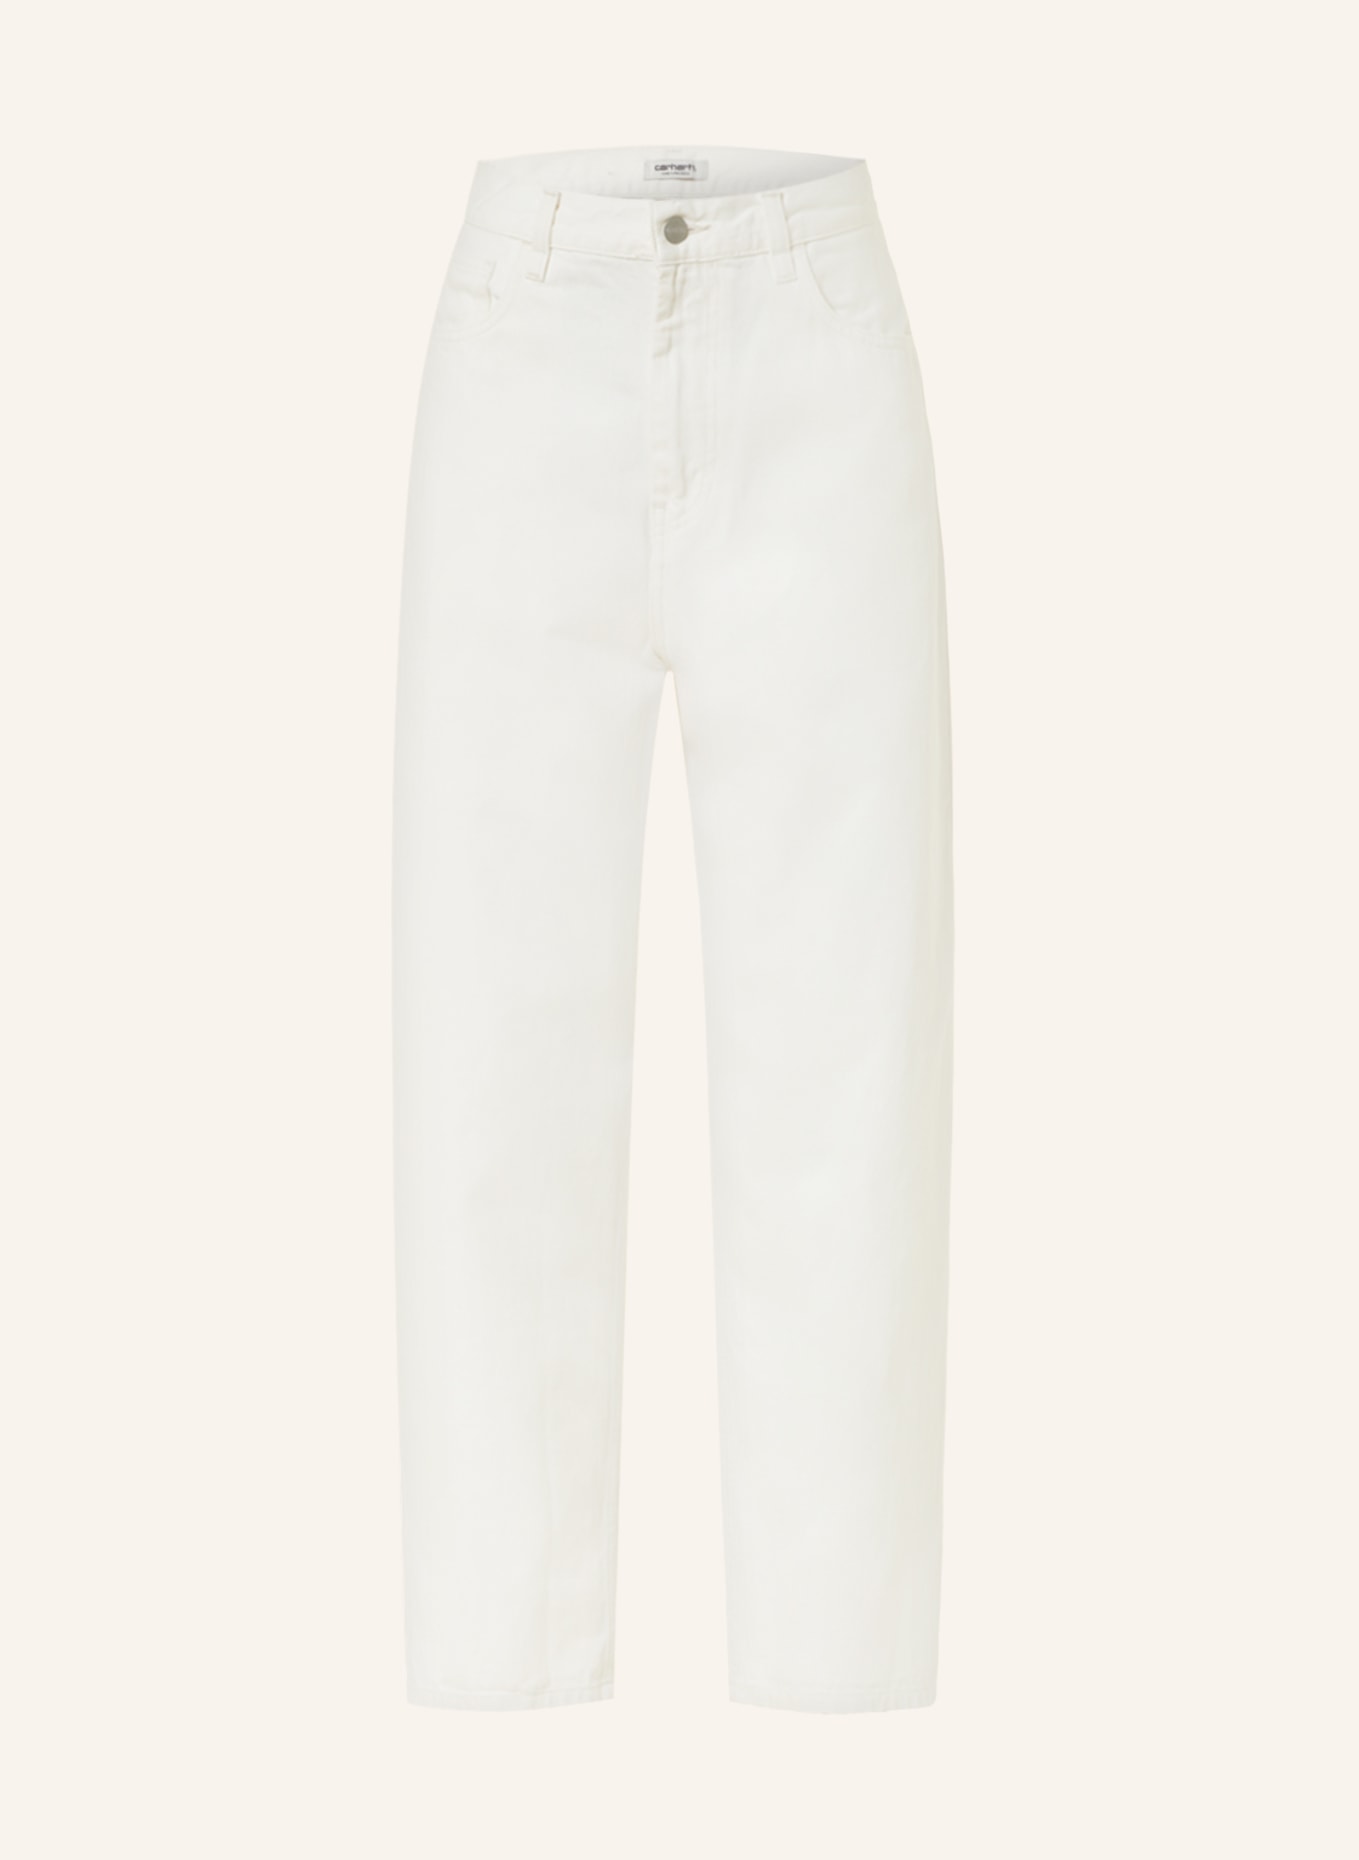 carhartt WIP Jeans BRANDON, Color: 0202 White rinsed (Image 1)